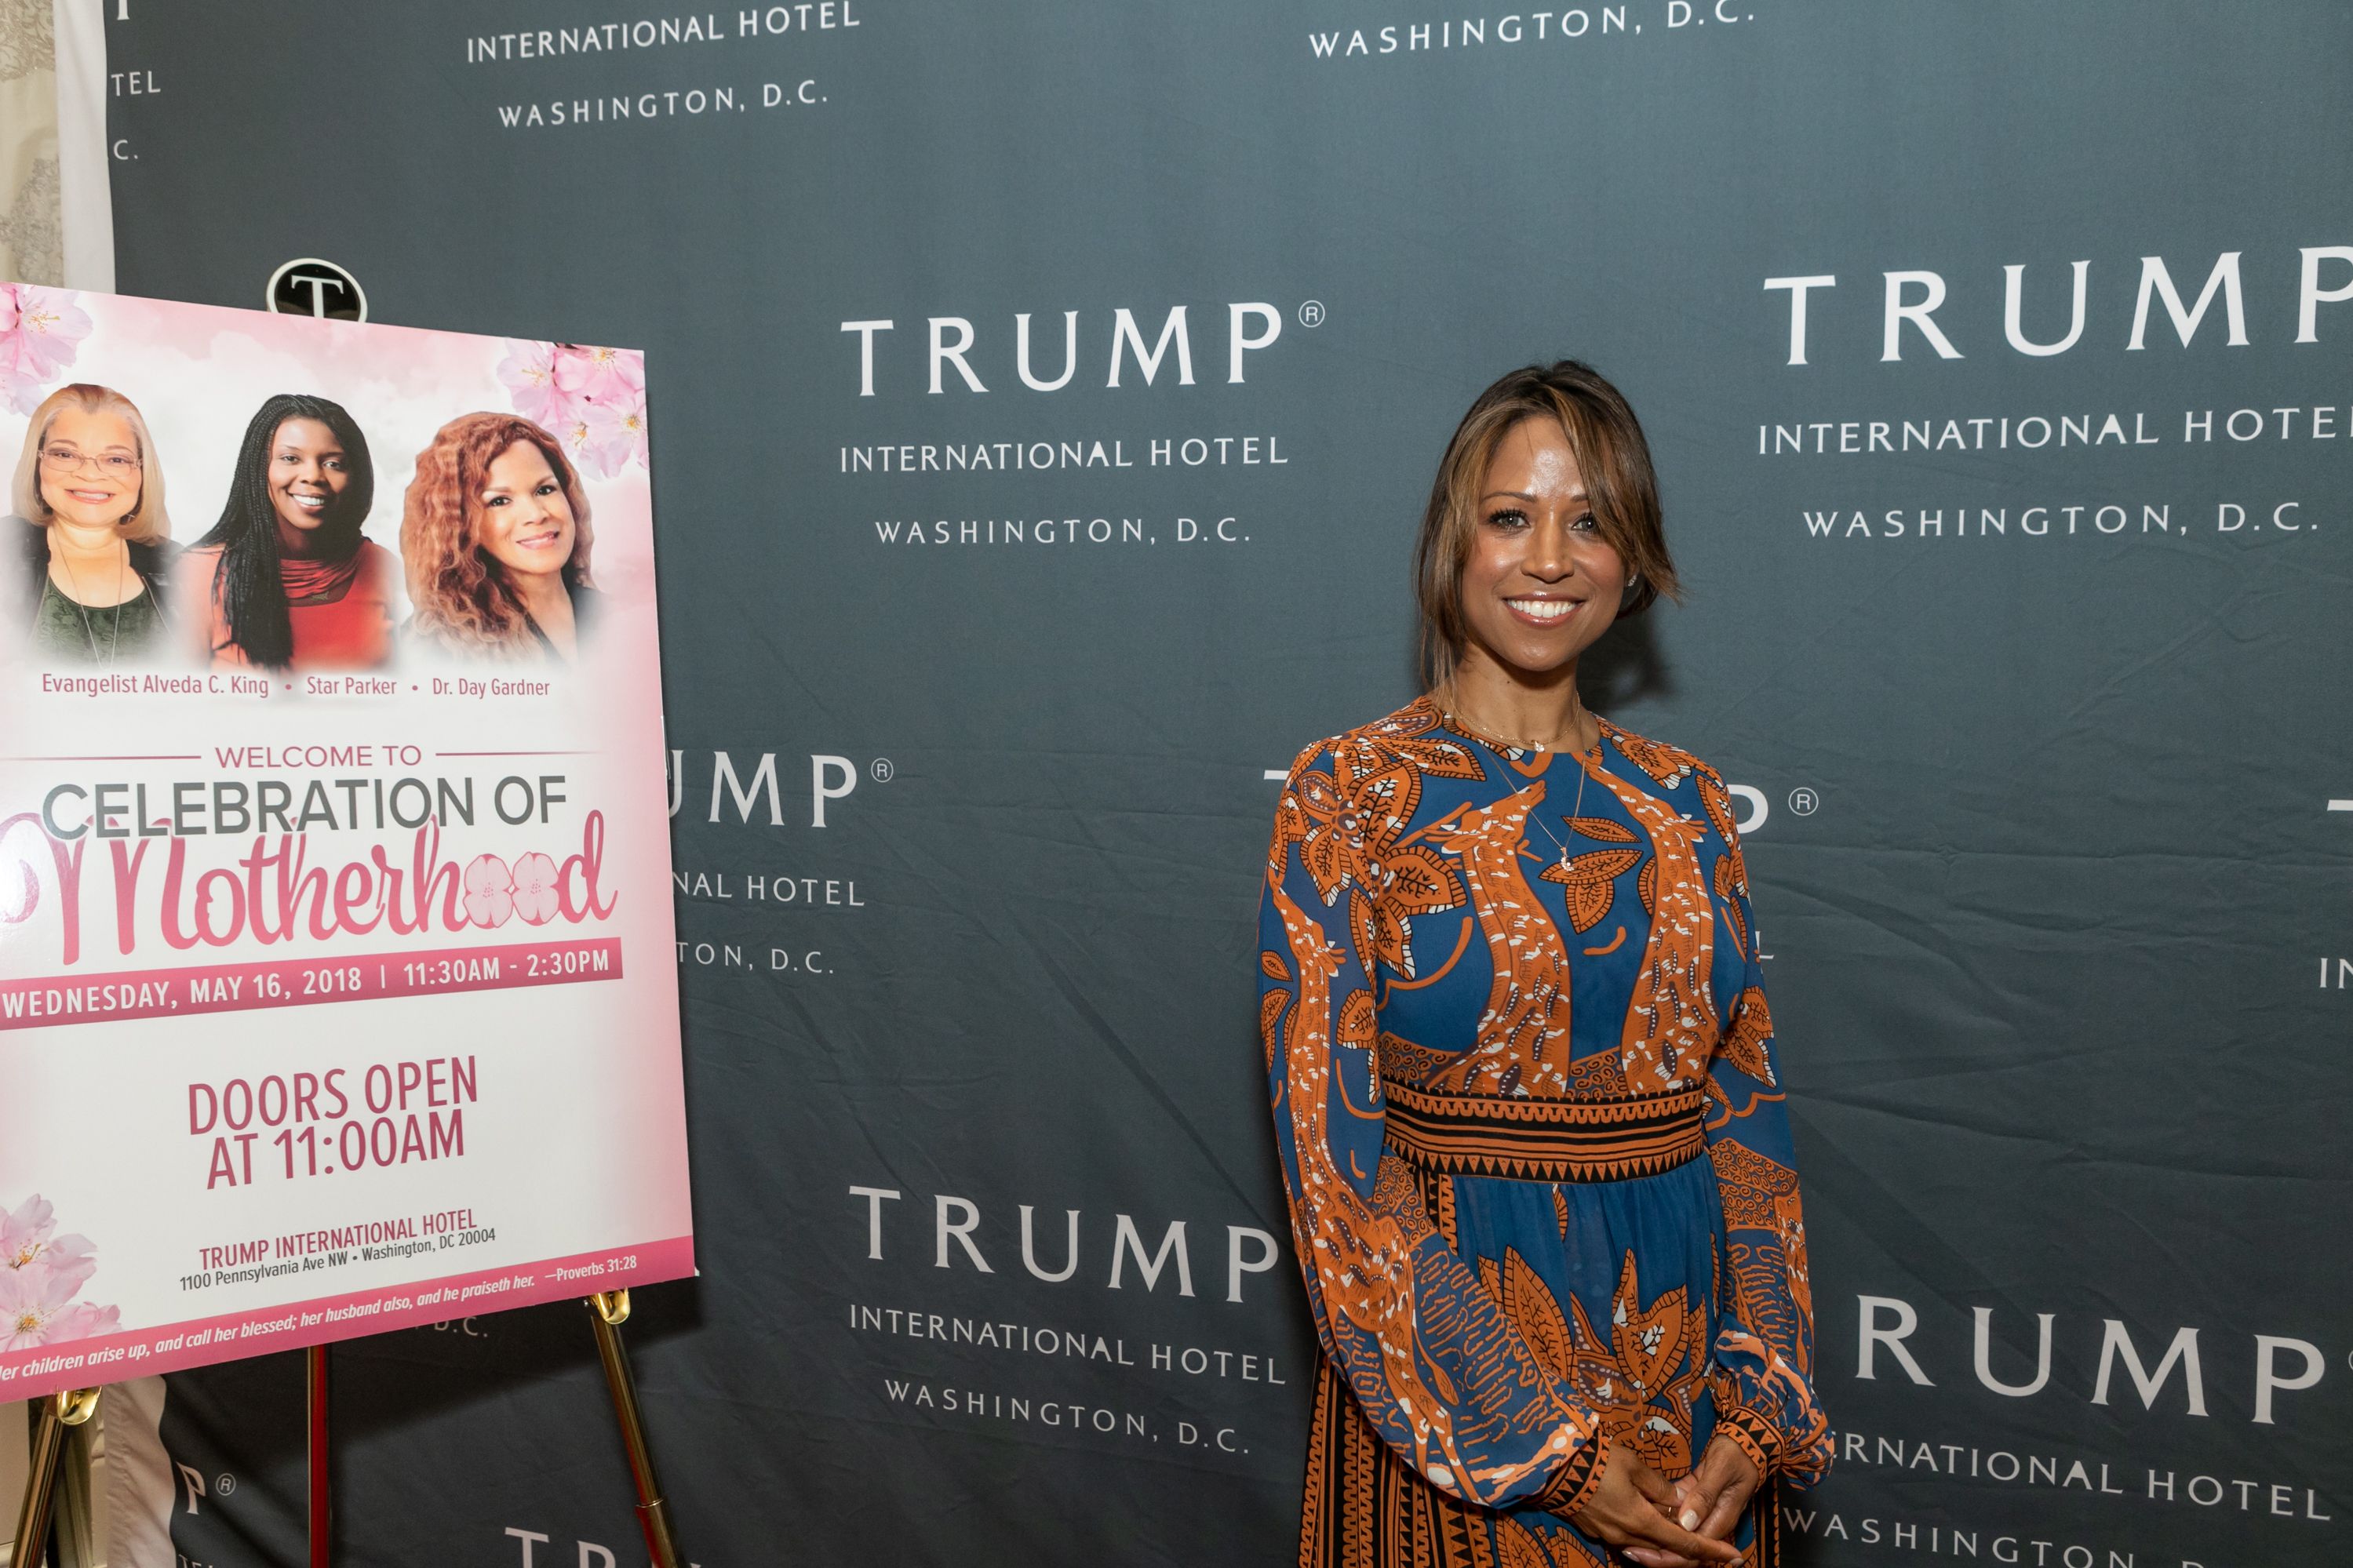 Actress Stacey Dash at a "Celebration of Motherhood" luncheon with keynote speaker Mrs. Candy Carson, at Trump International Hotel in Washington, D.C., on Wednesday, May 16, 2018 | Photo: Getty Images